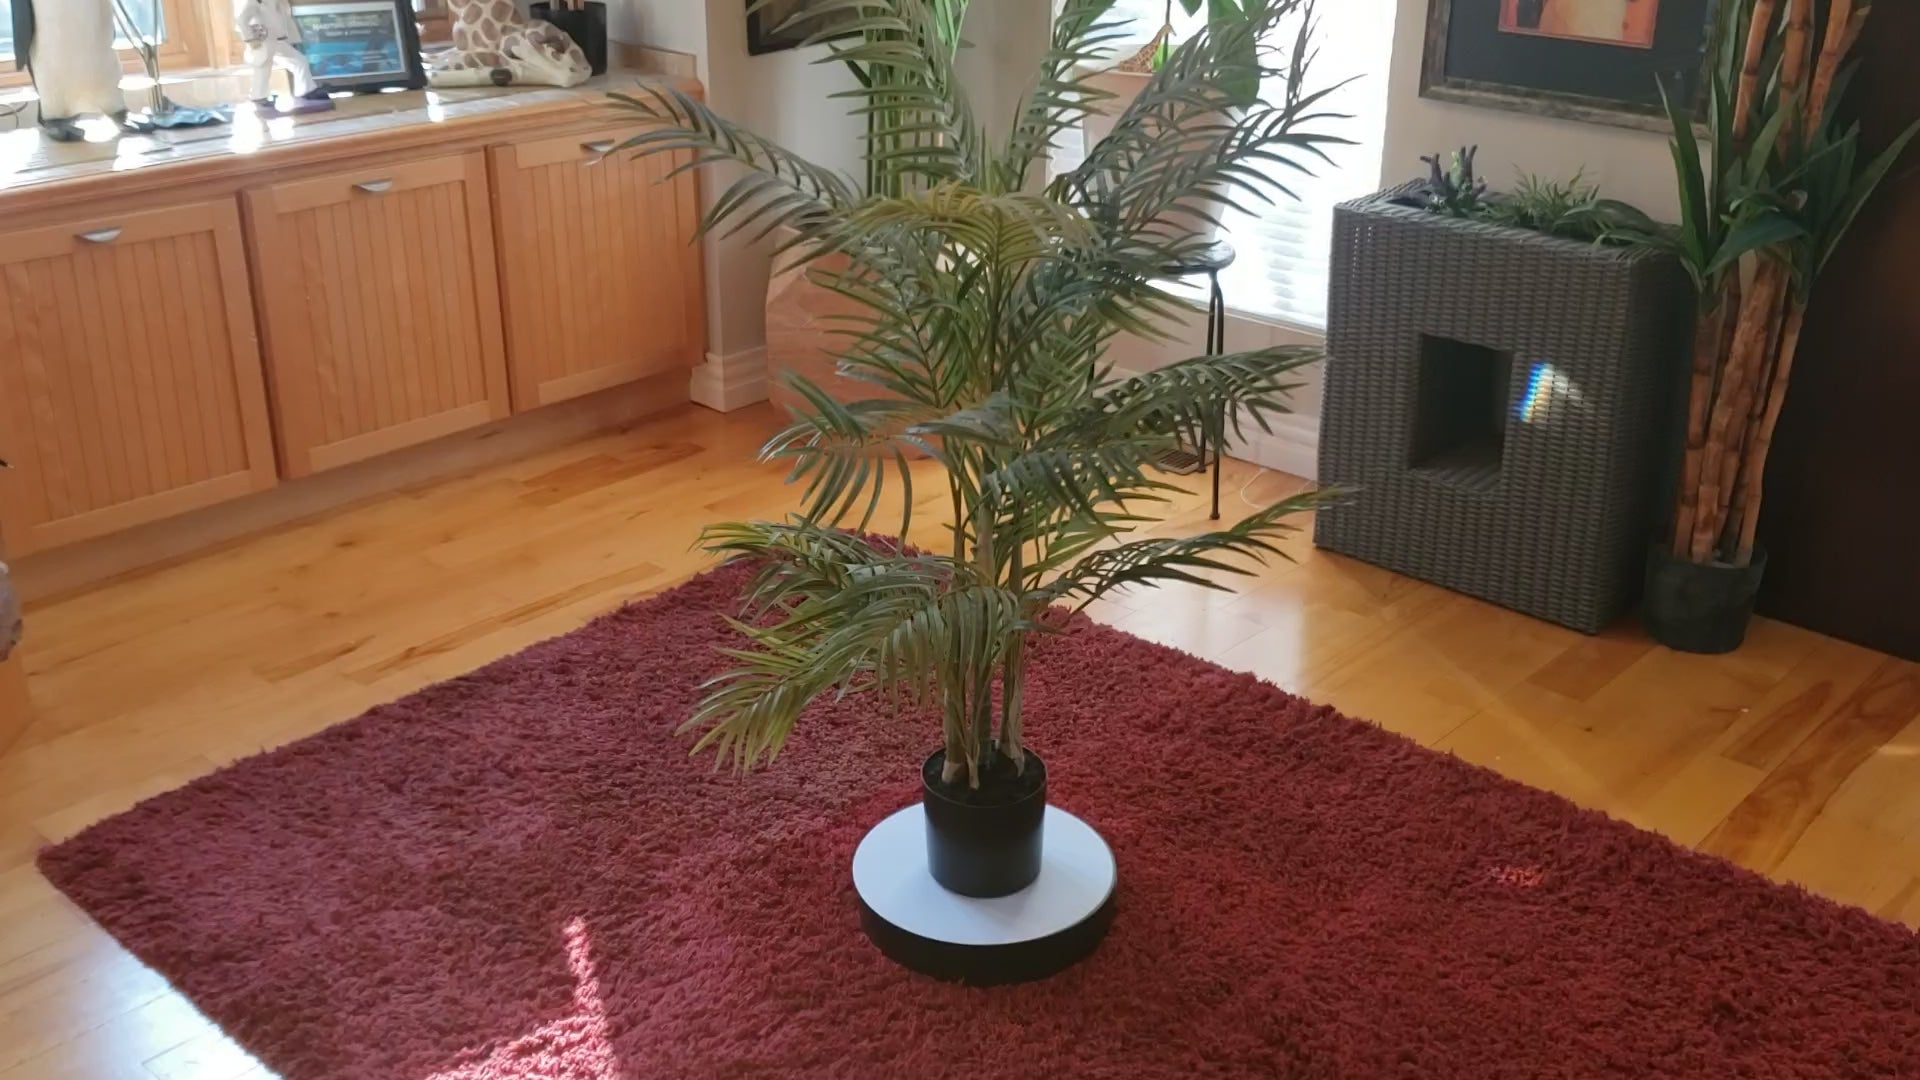 Auction for sale areca palm tree